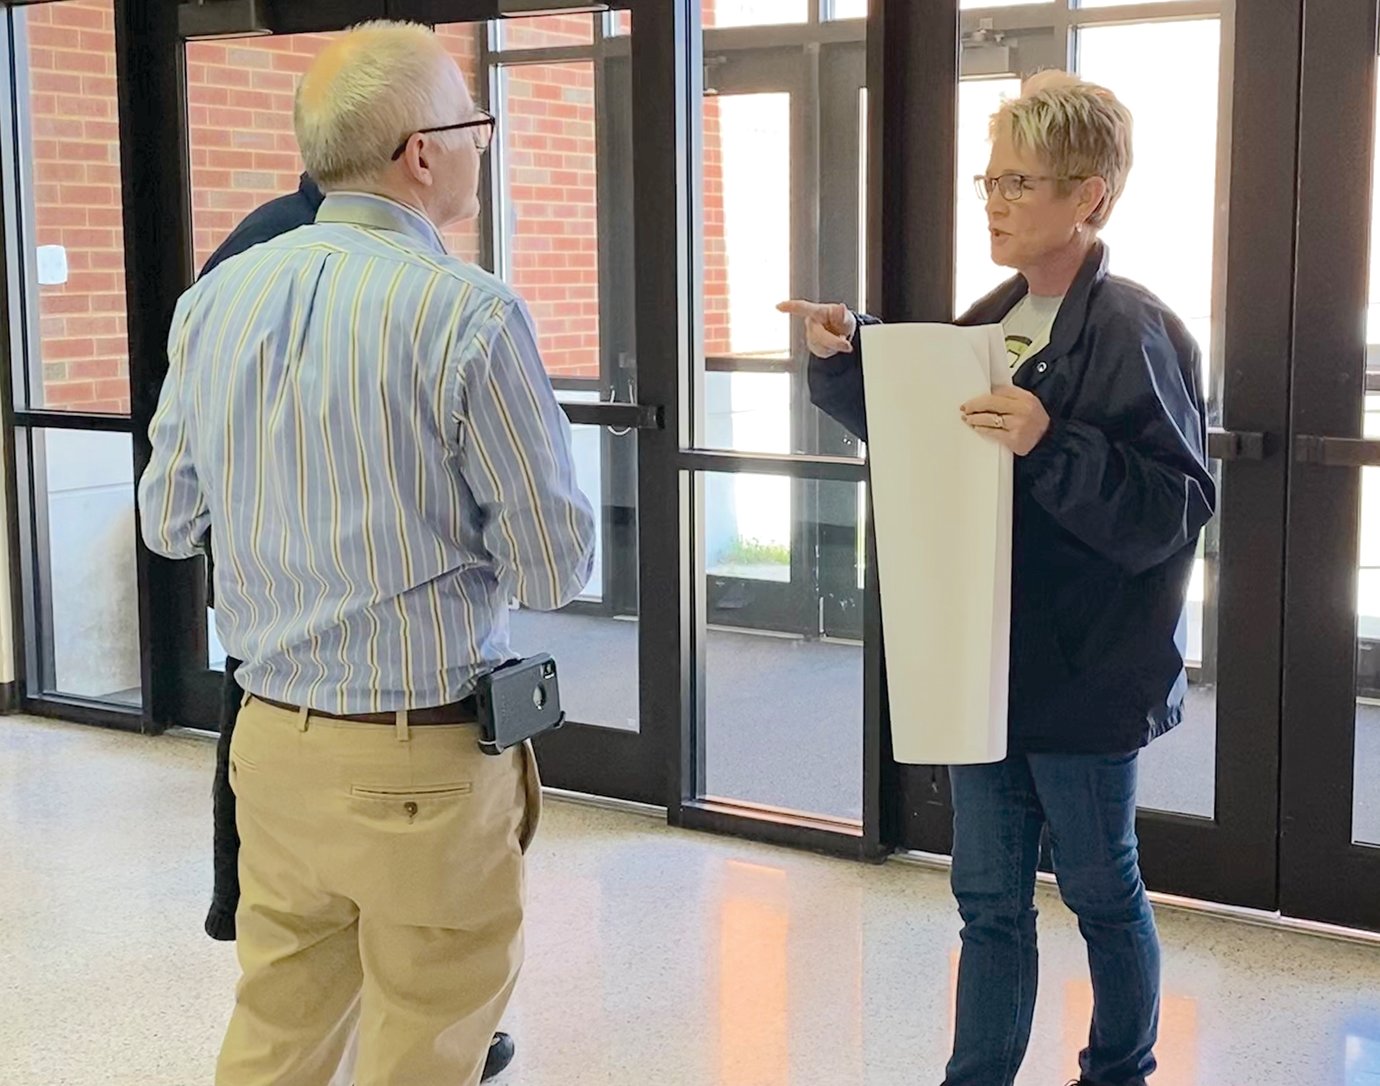 Montgomery County Health Department Administrator Amber Reed and Montgomery County Health Officer Dr. Scott Douglas talk through details of the drive-through testing site at Crawfordsville High School on Monday, March 30.